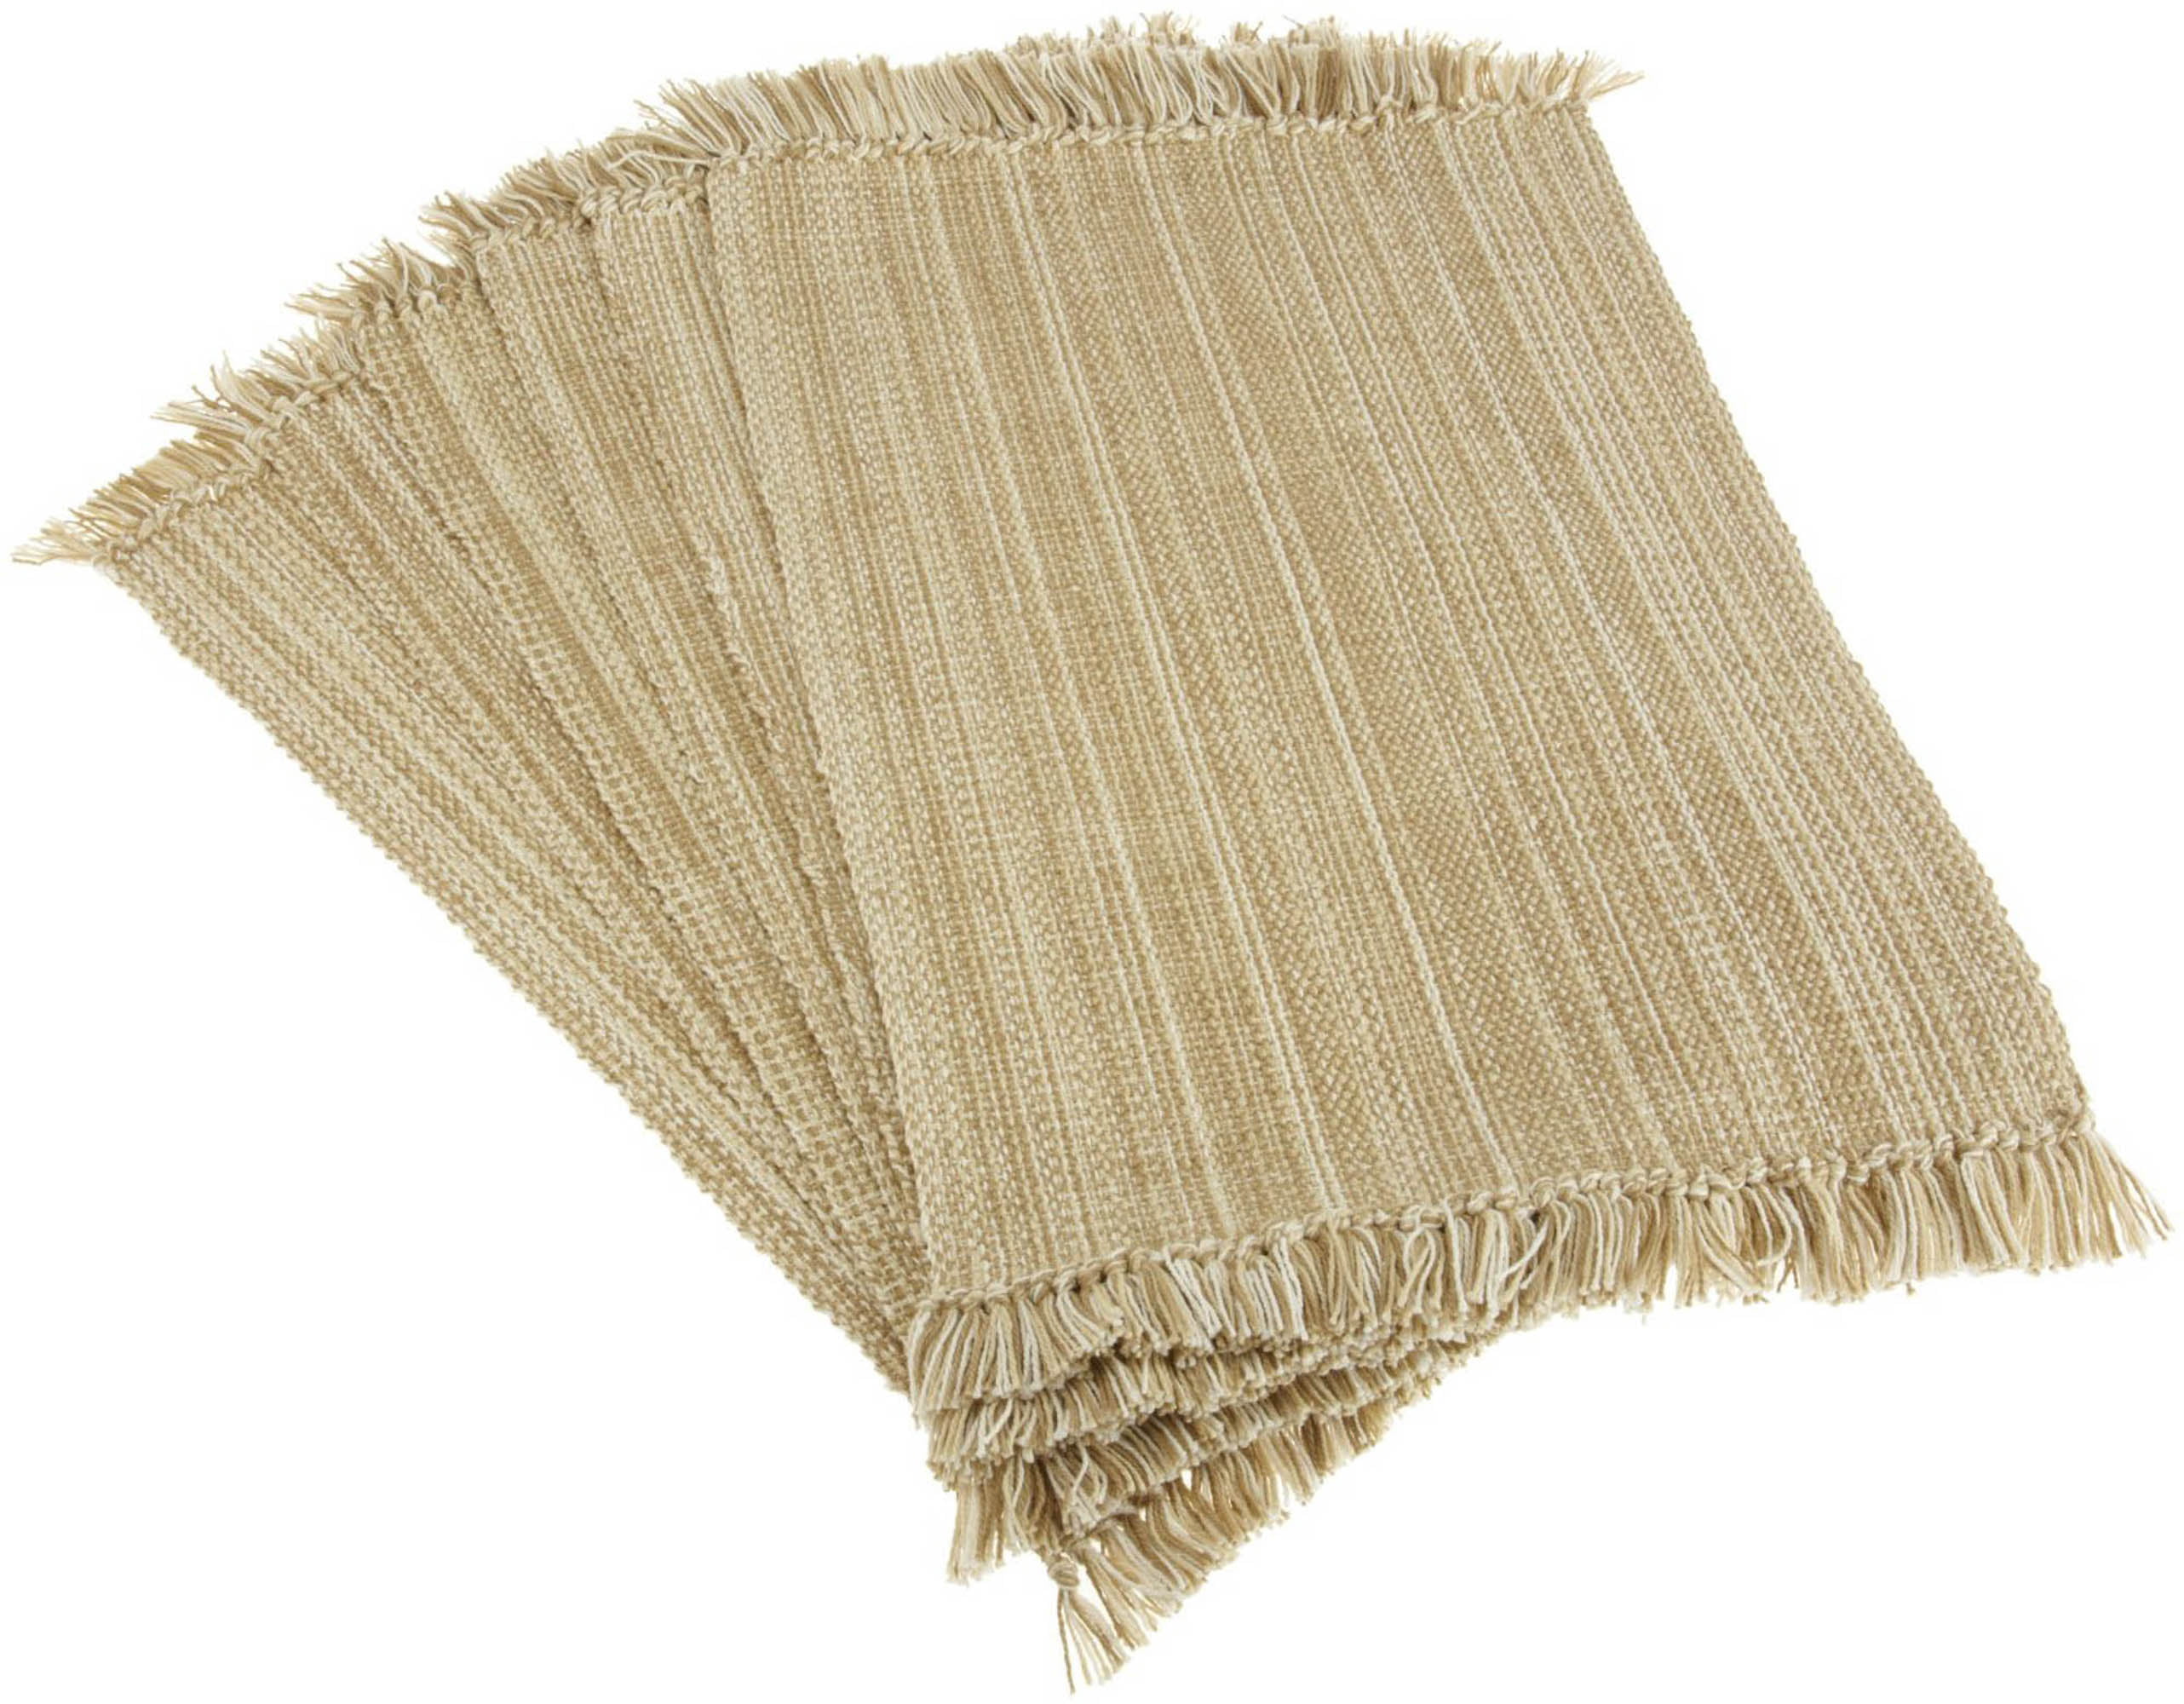 100% Cotton Cotton Craft 4 Pack Salsa Stripe Hand Knotted Fringe Placemats Natural Light Olive 13x19 Hand Woven by Skilled artisans Unique Hand Knotted Decorative Fringe